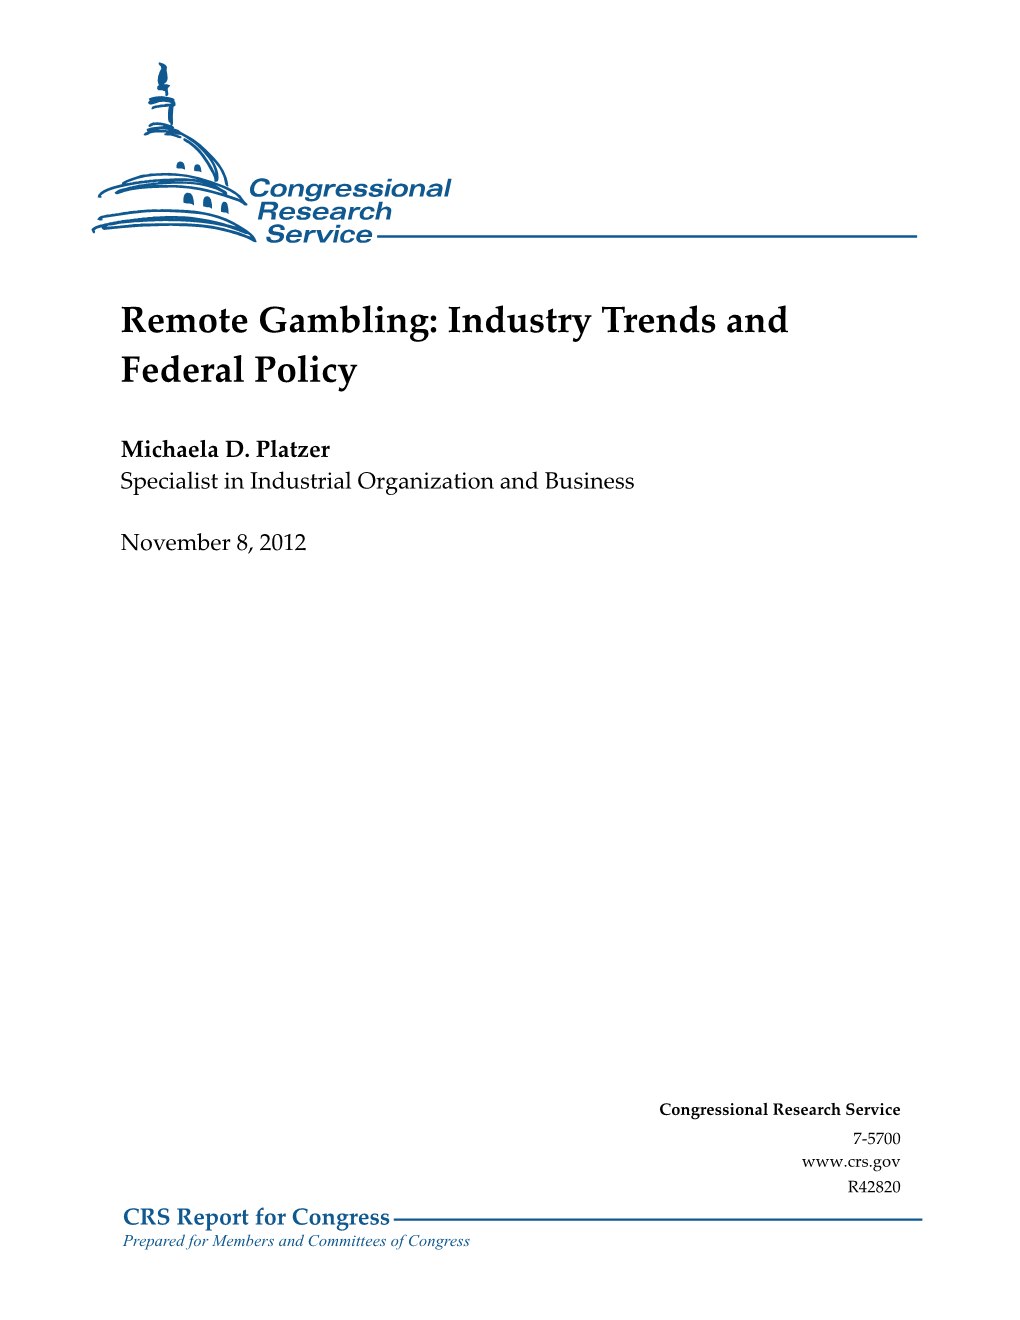 Remote Gambling: Industry Trends and Federal Policy